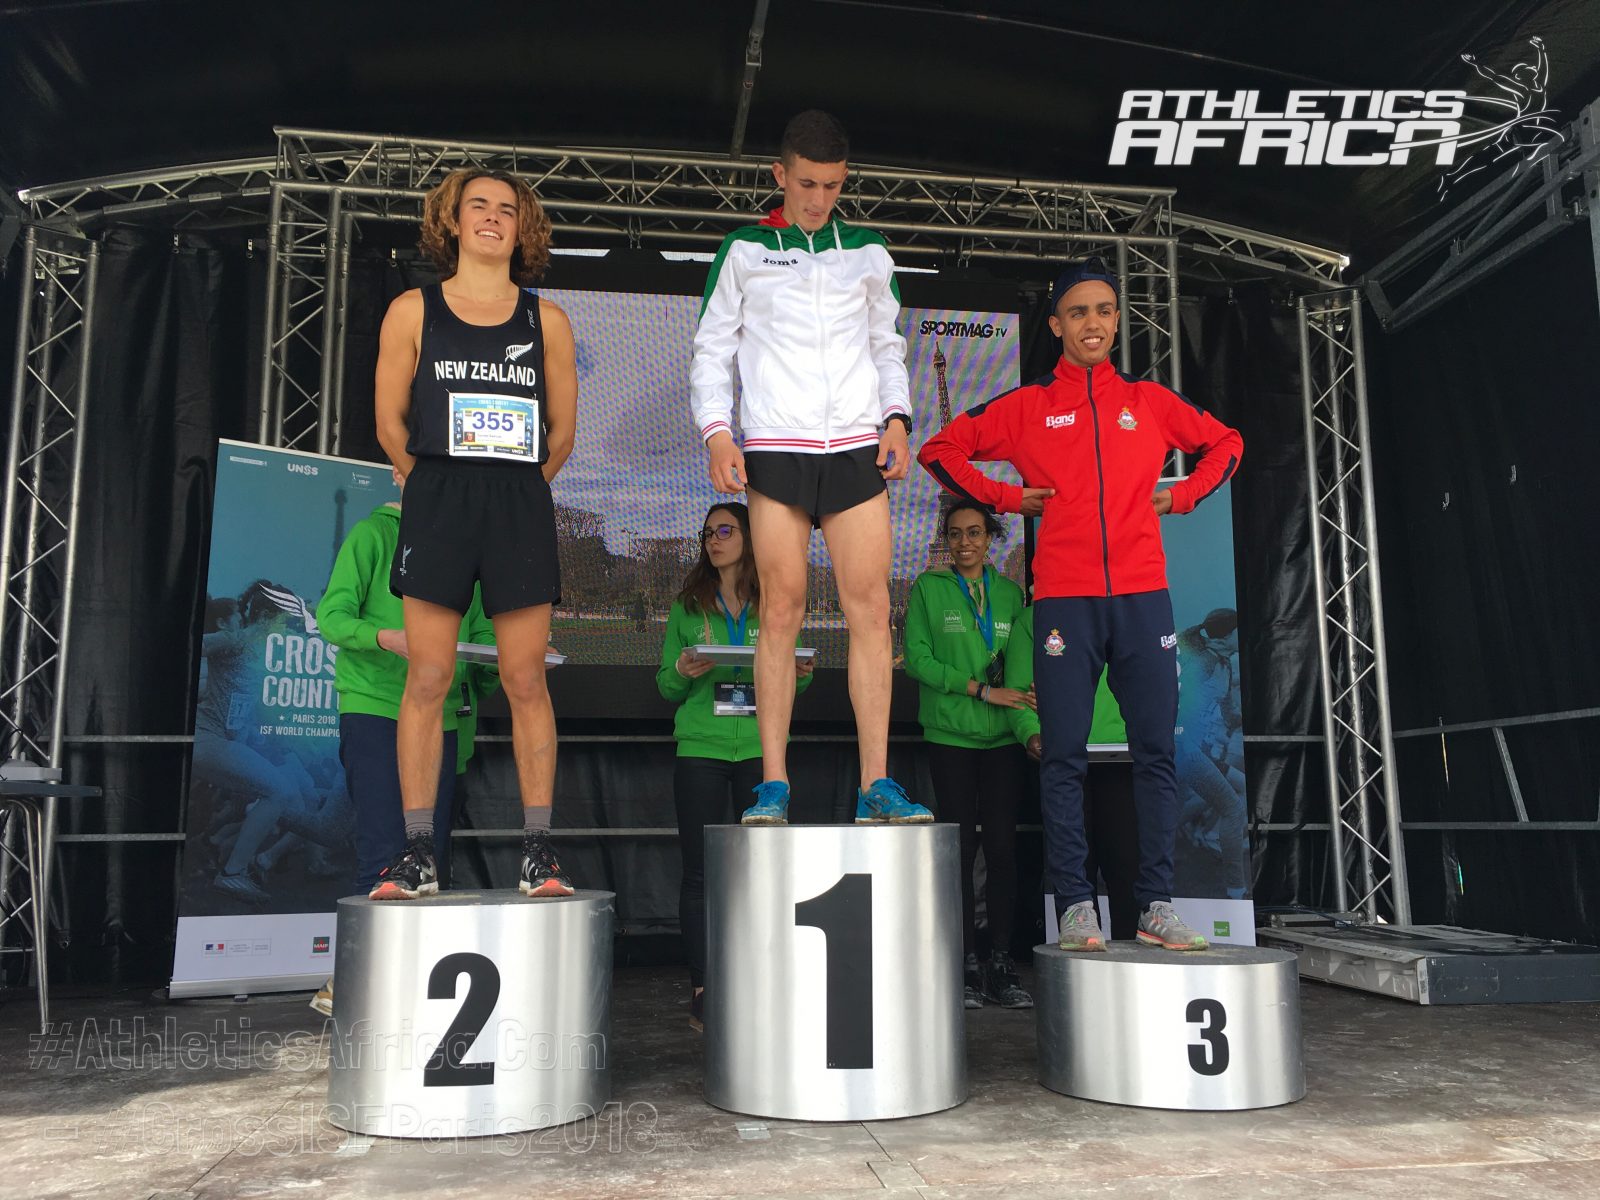 Selected Boys podium at the 2018 International School Sport Federation World School Championship (WSC) Cross Country in Paris on Wednesday 4 April / Photo credit: Yomi Omogbeja